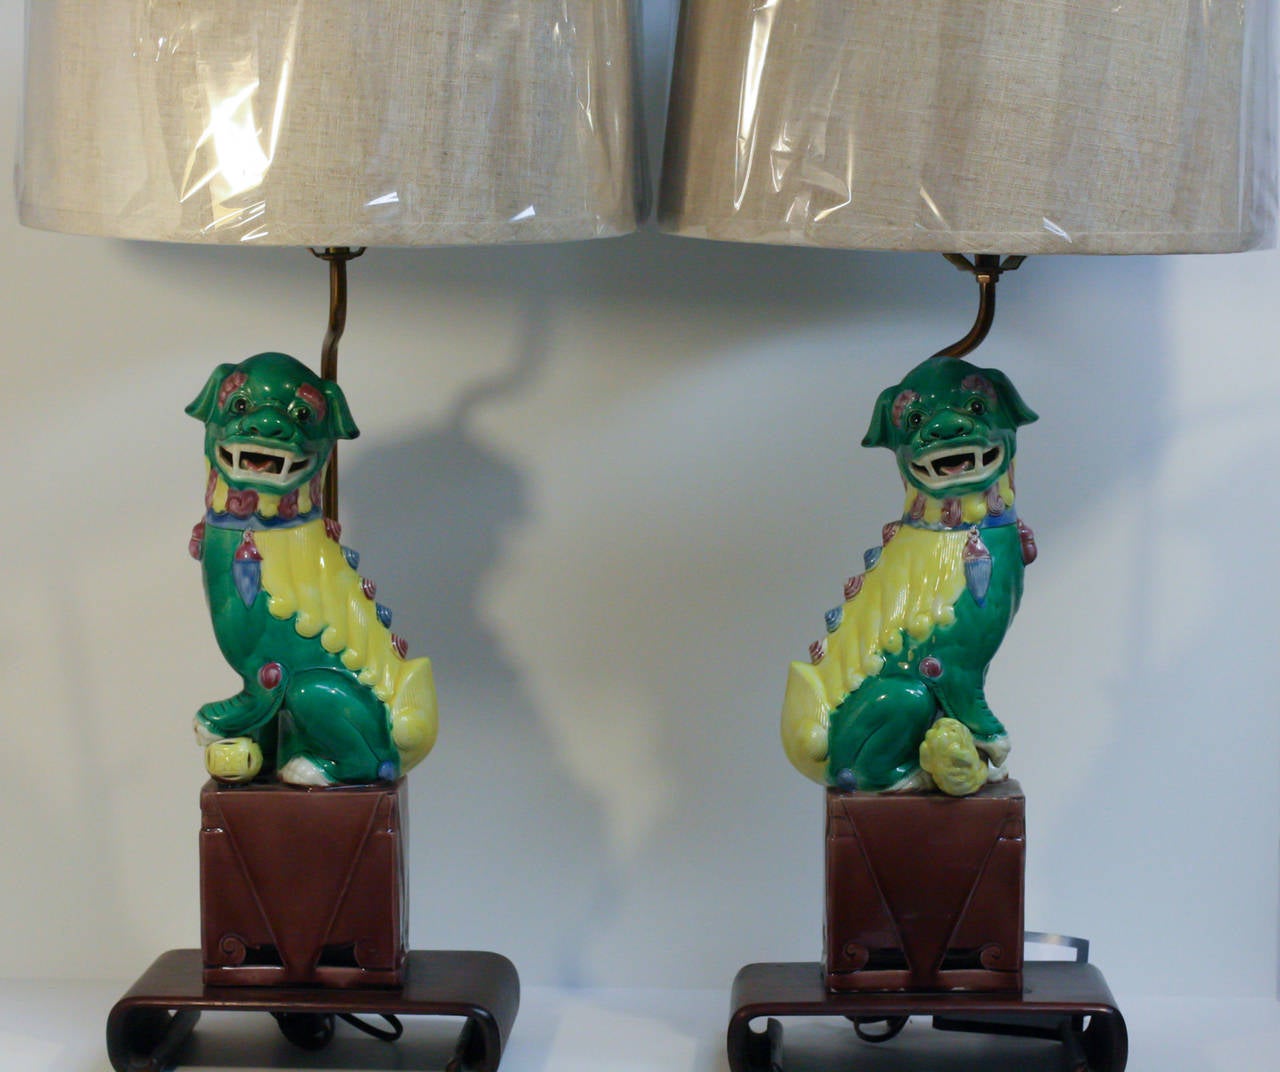 These handsome porcelain foo dog lamps are multicolored featuring green, yellow, blue and bown. Thet are perched on a ming style stand.